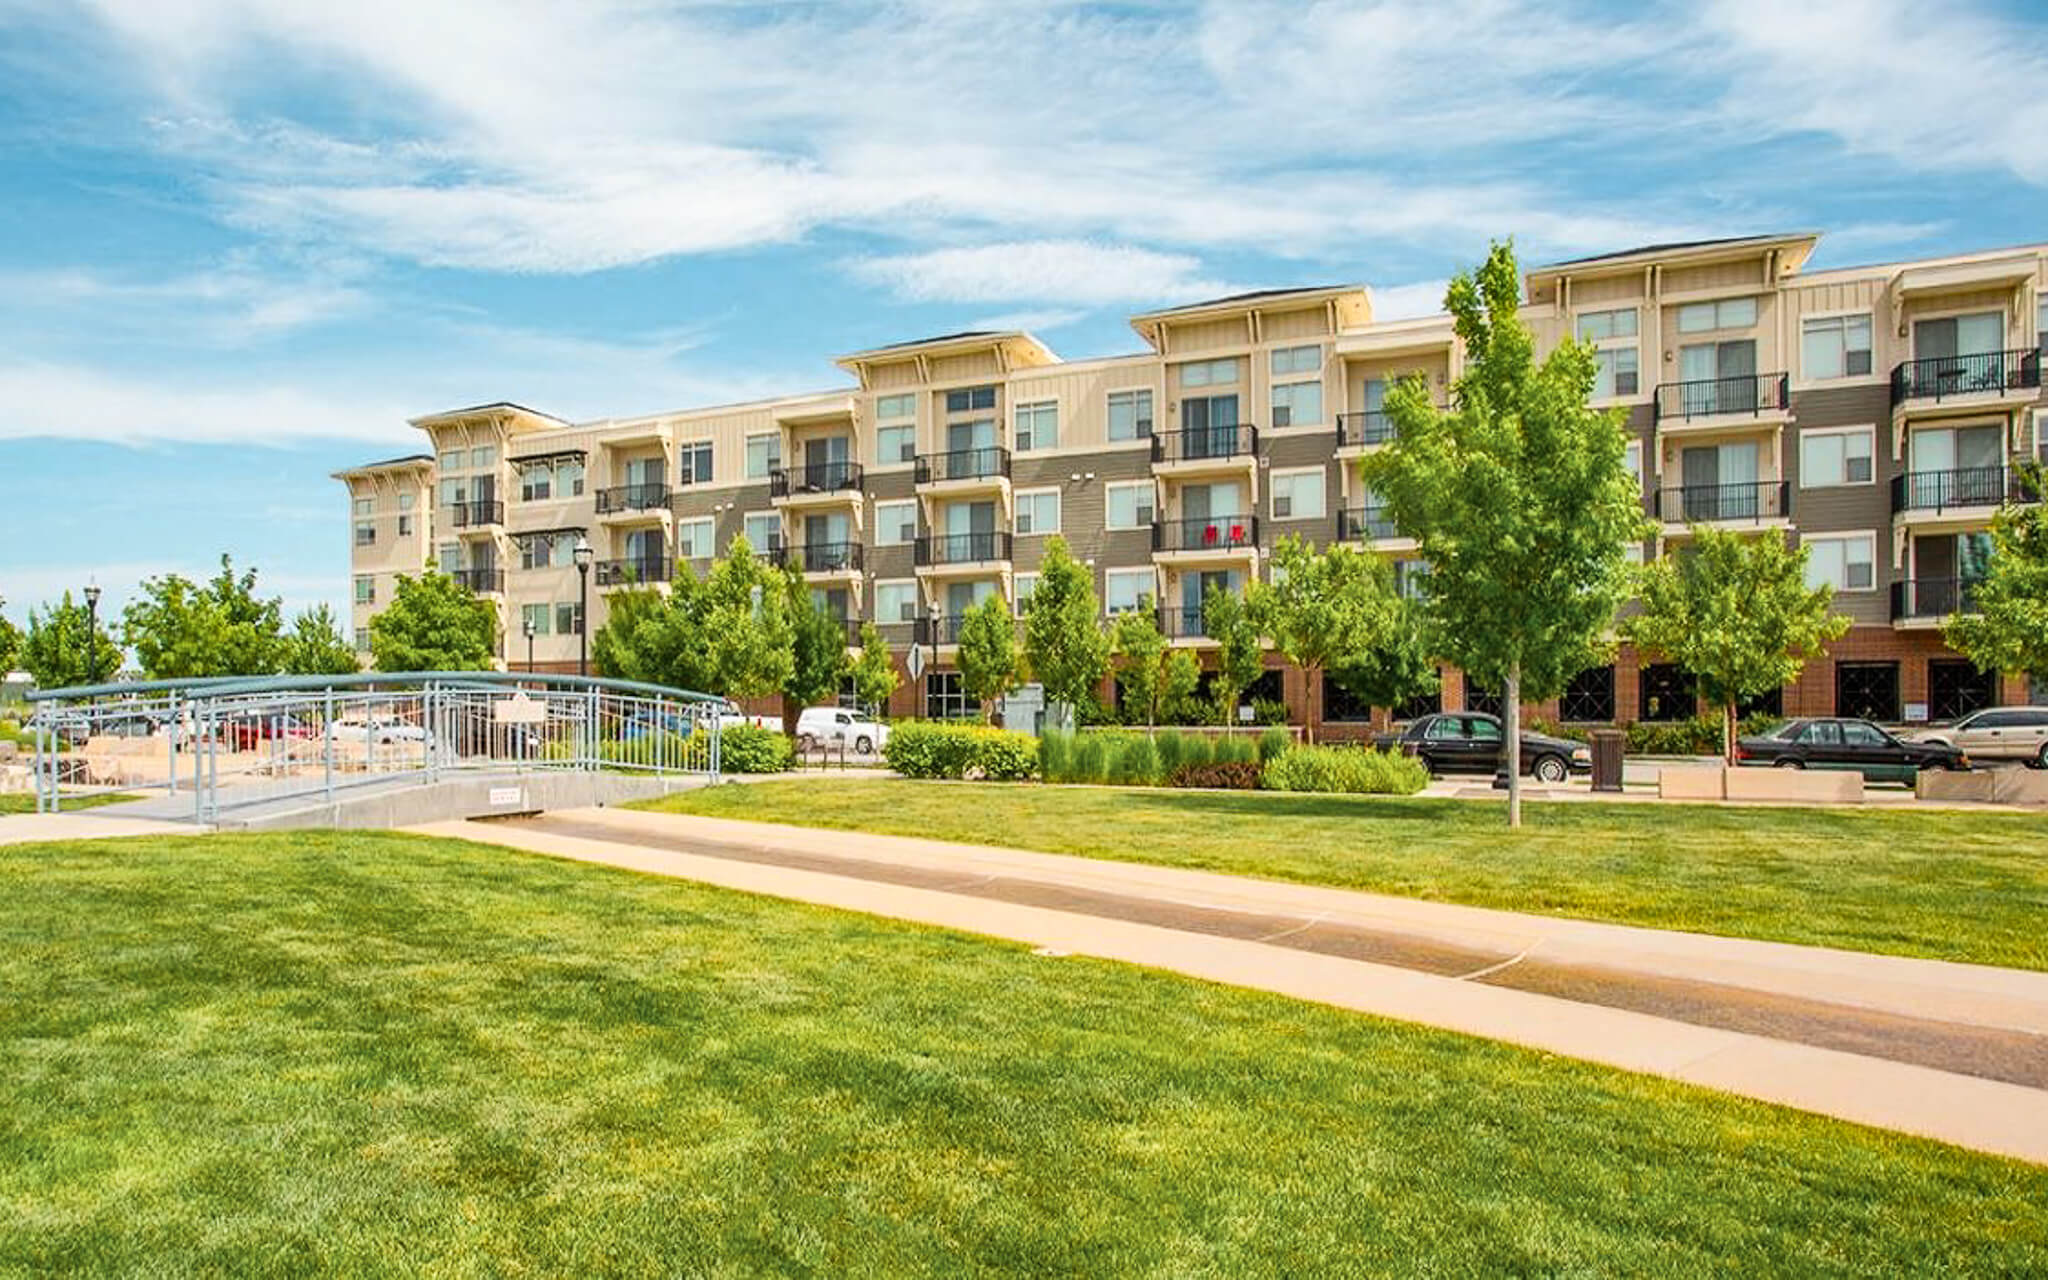 Paragon Corporate Housing - ICO Fairbourne Station Apartments - West Valley City Utah